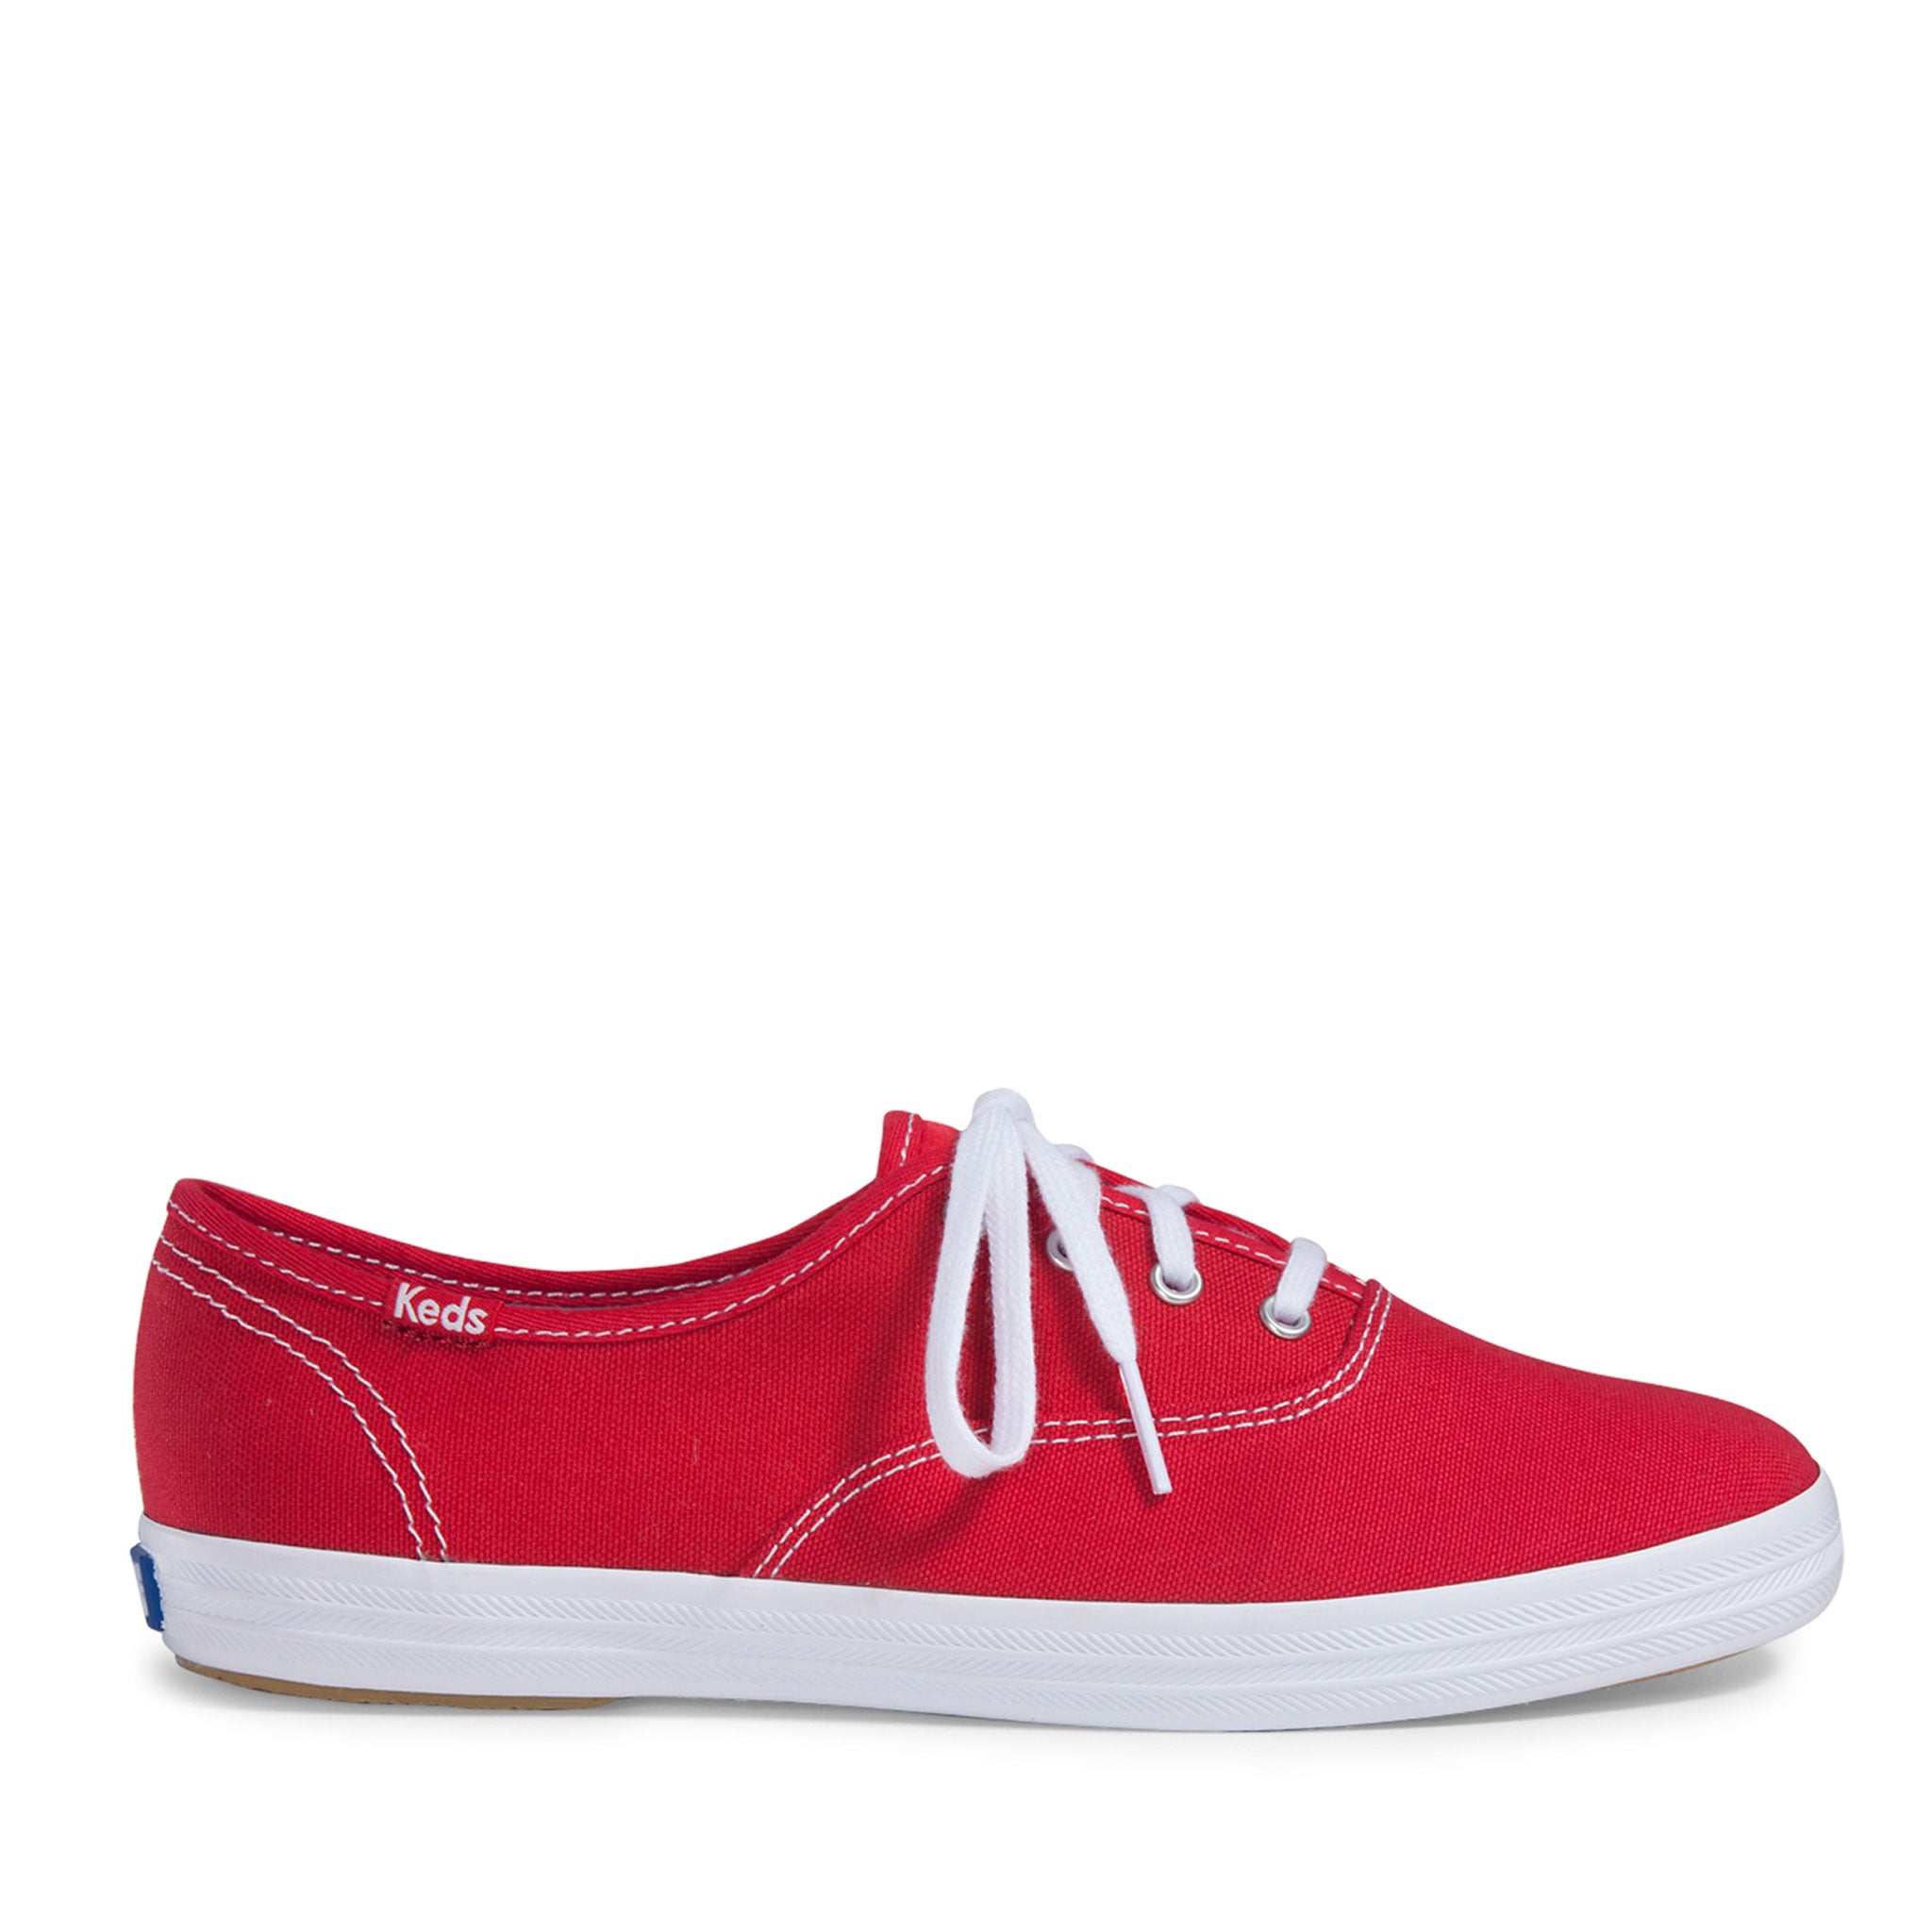 Keds Women's Champion Oxford Shoe in Red